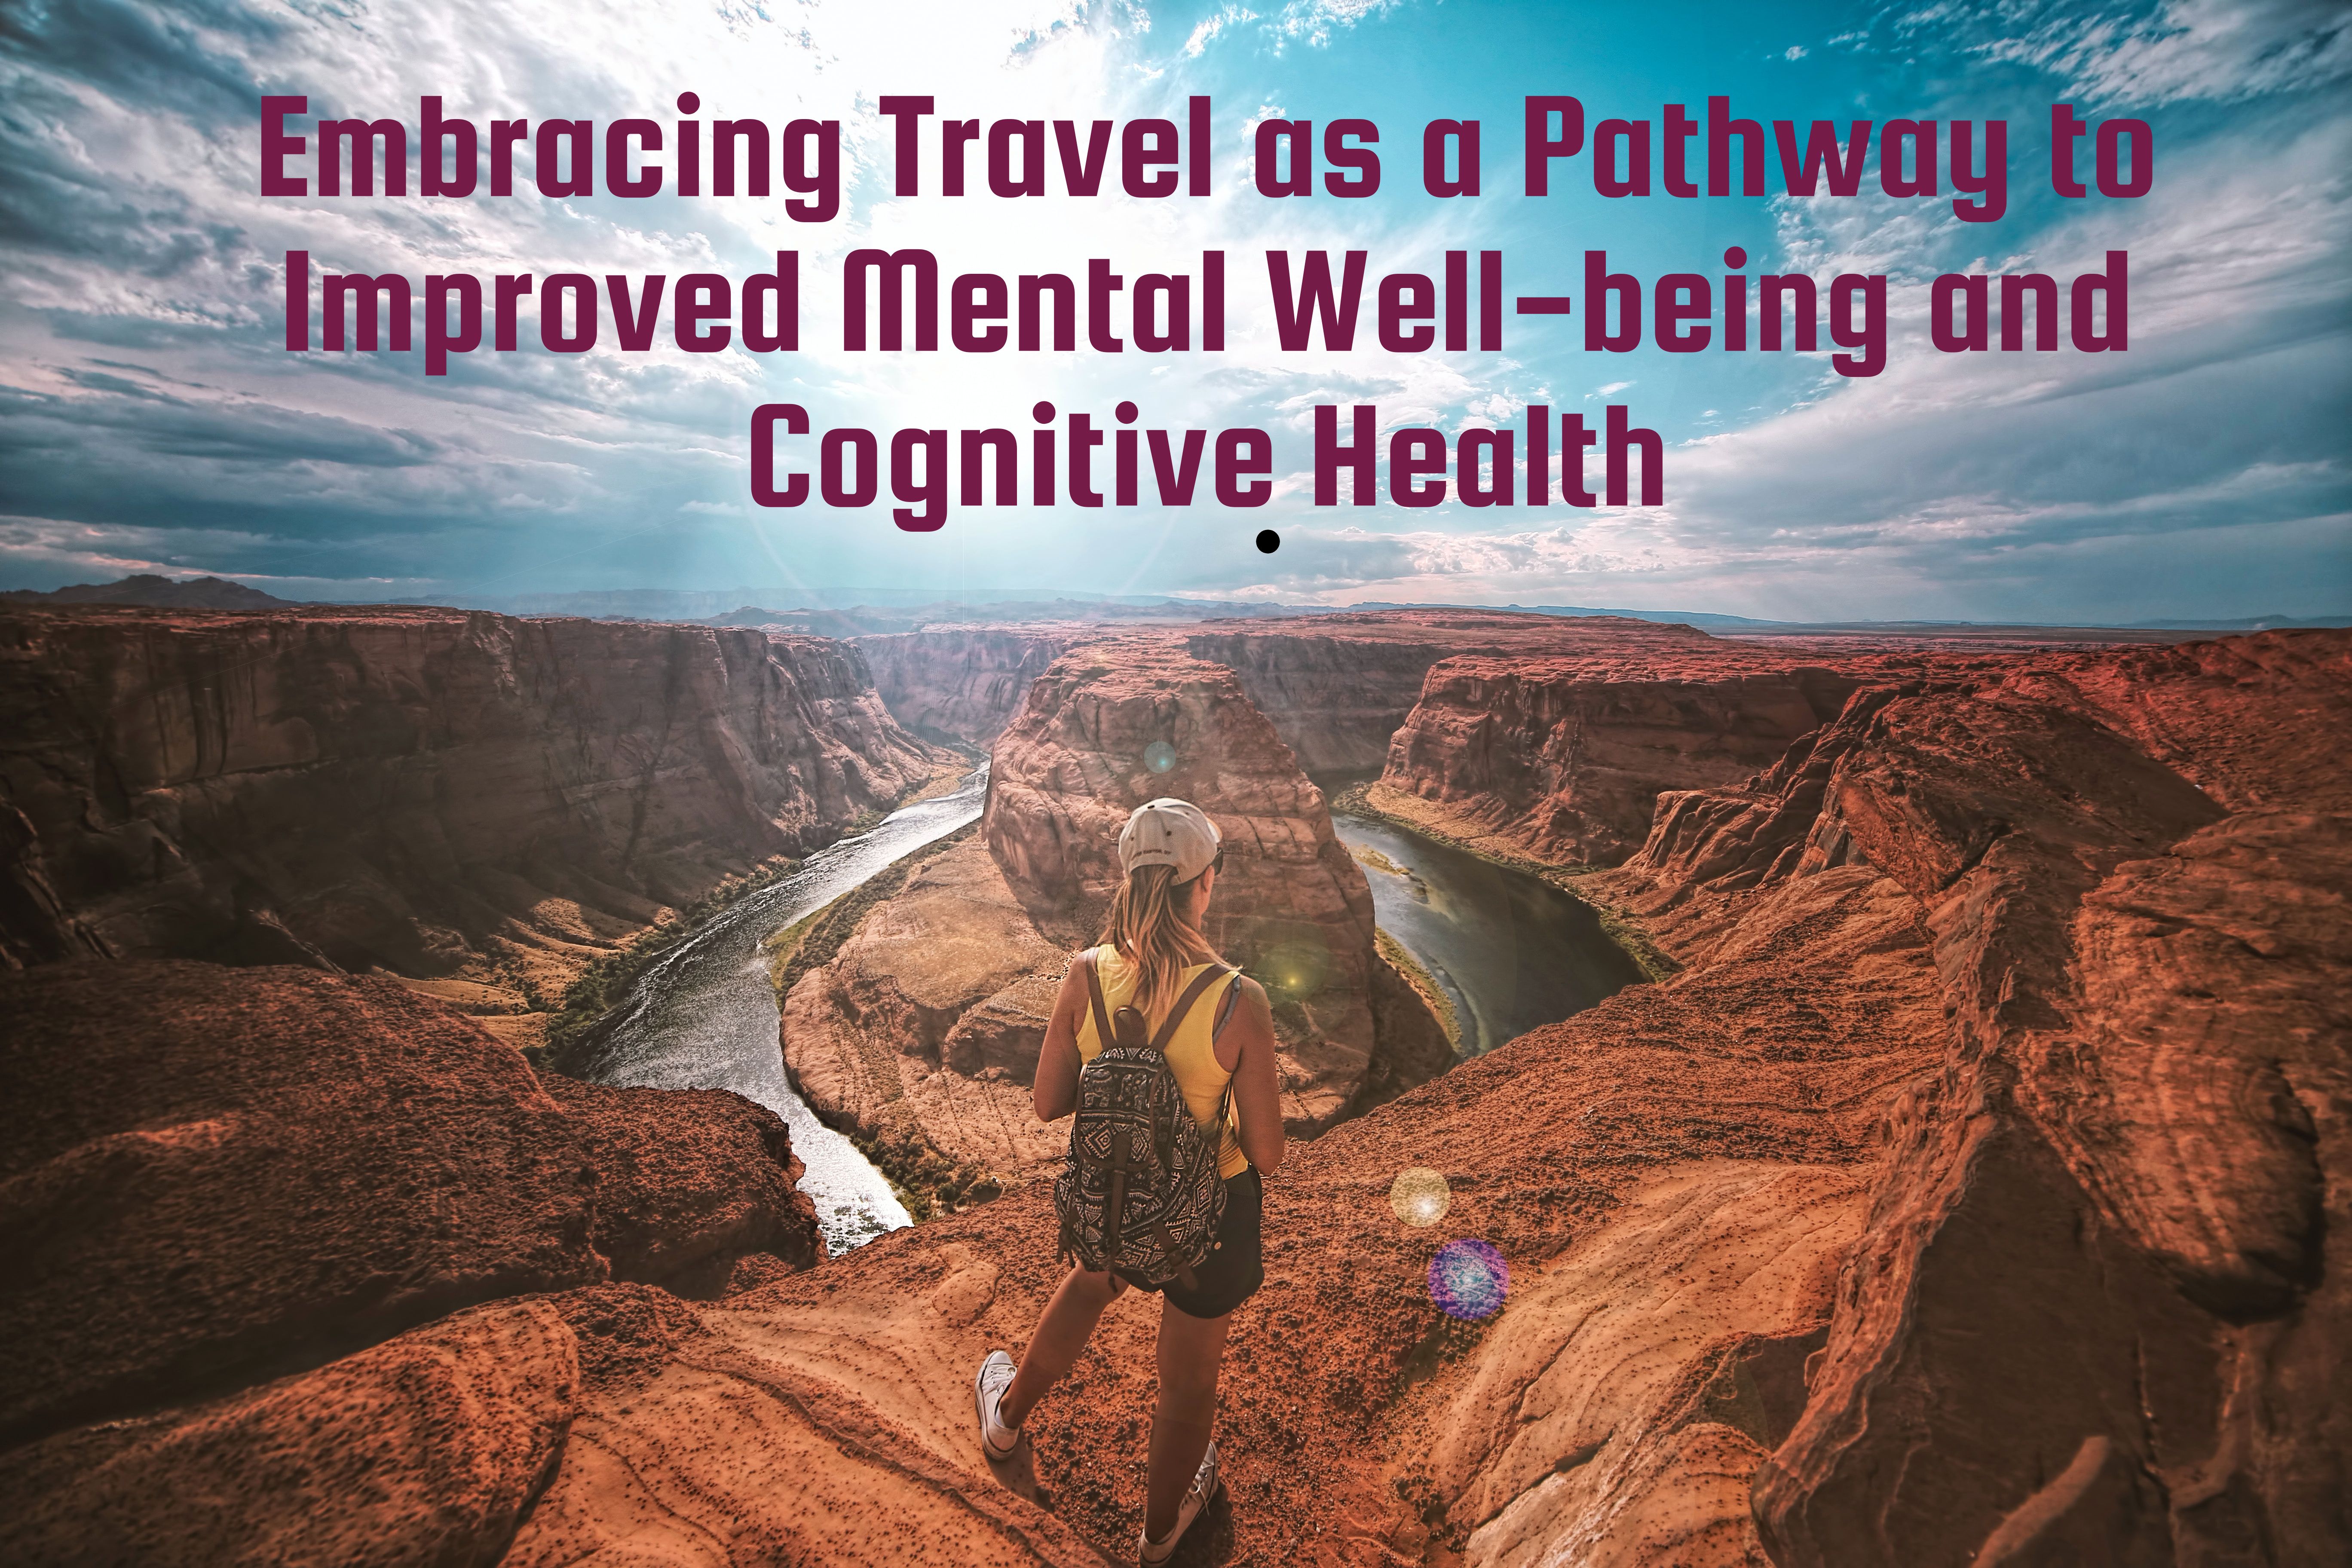 Embracing Travel as a Pathway to Improved Mental Well-being and Cognitive Wellness